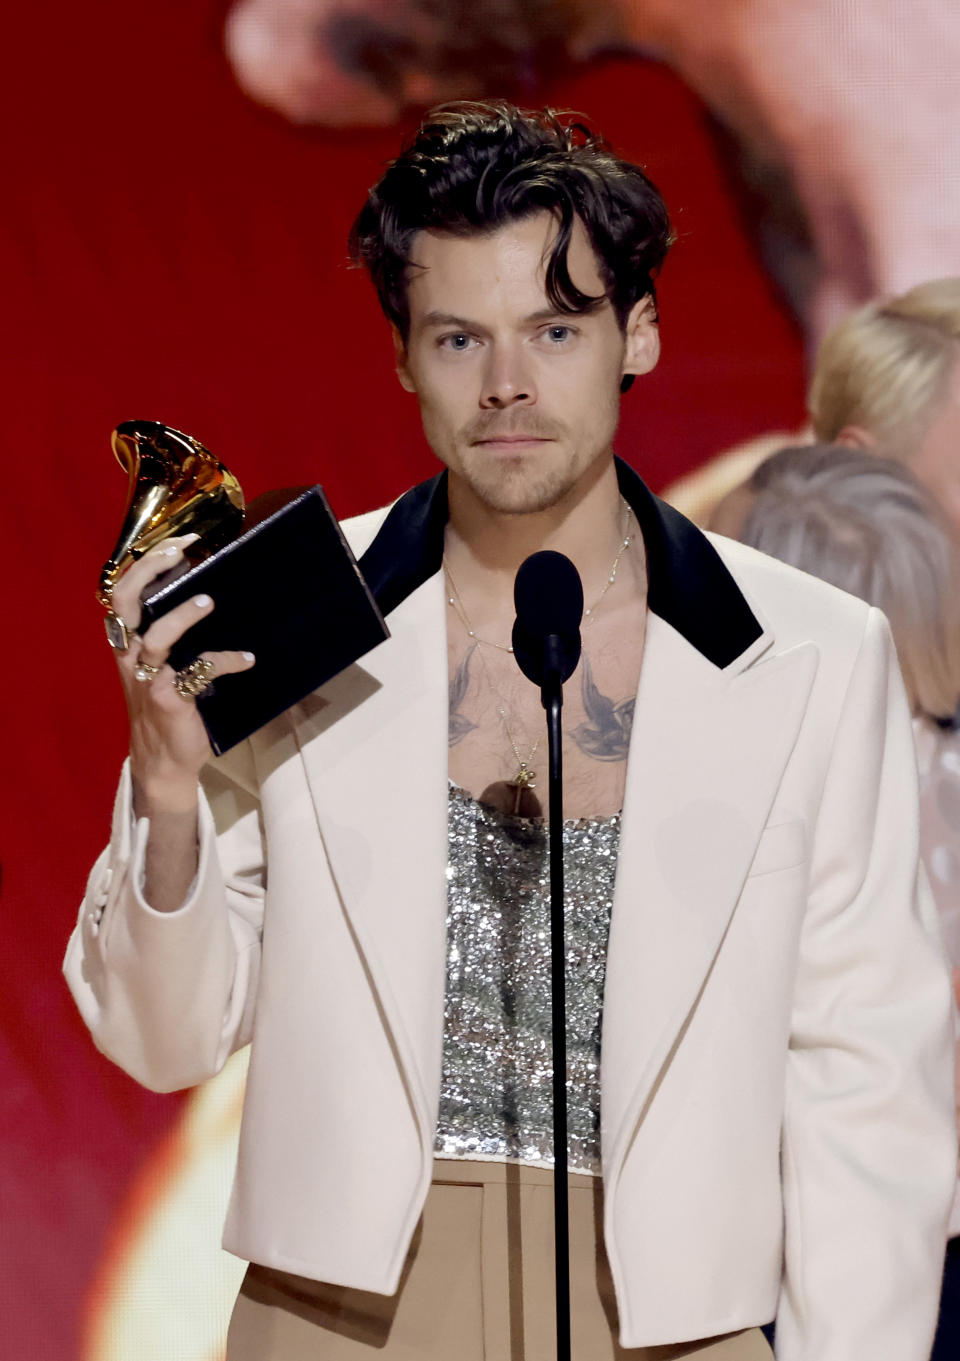 Harry Styles in a cream suit jacket with a glittering shirt, holding a Grammy award onstage